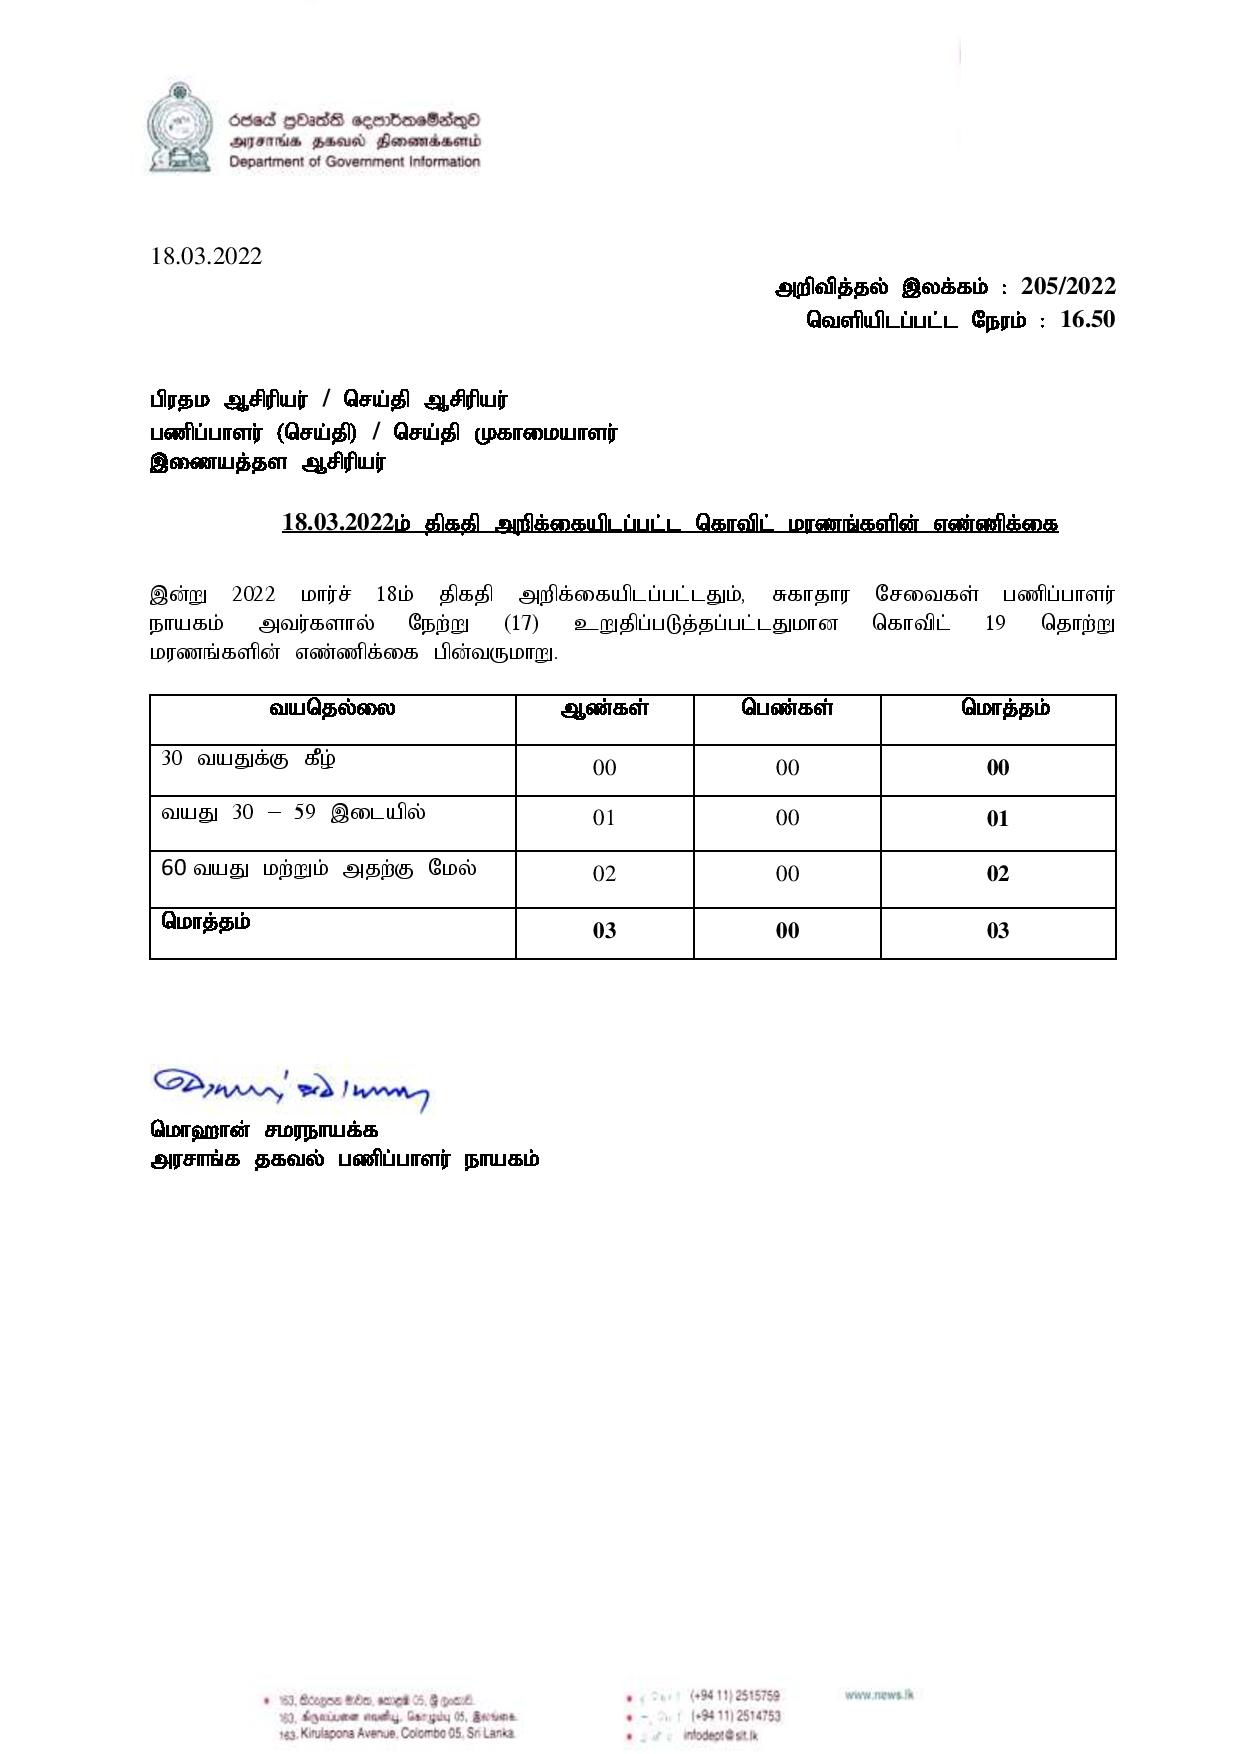 Release No 205 Tamil page 001